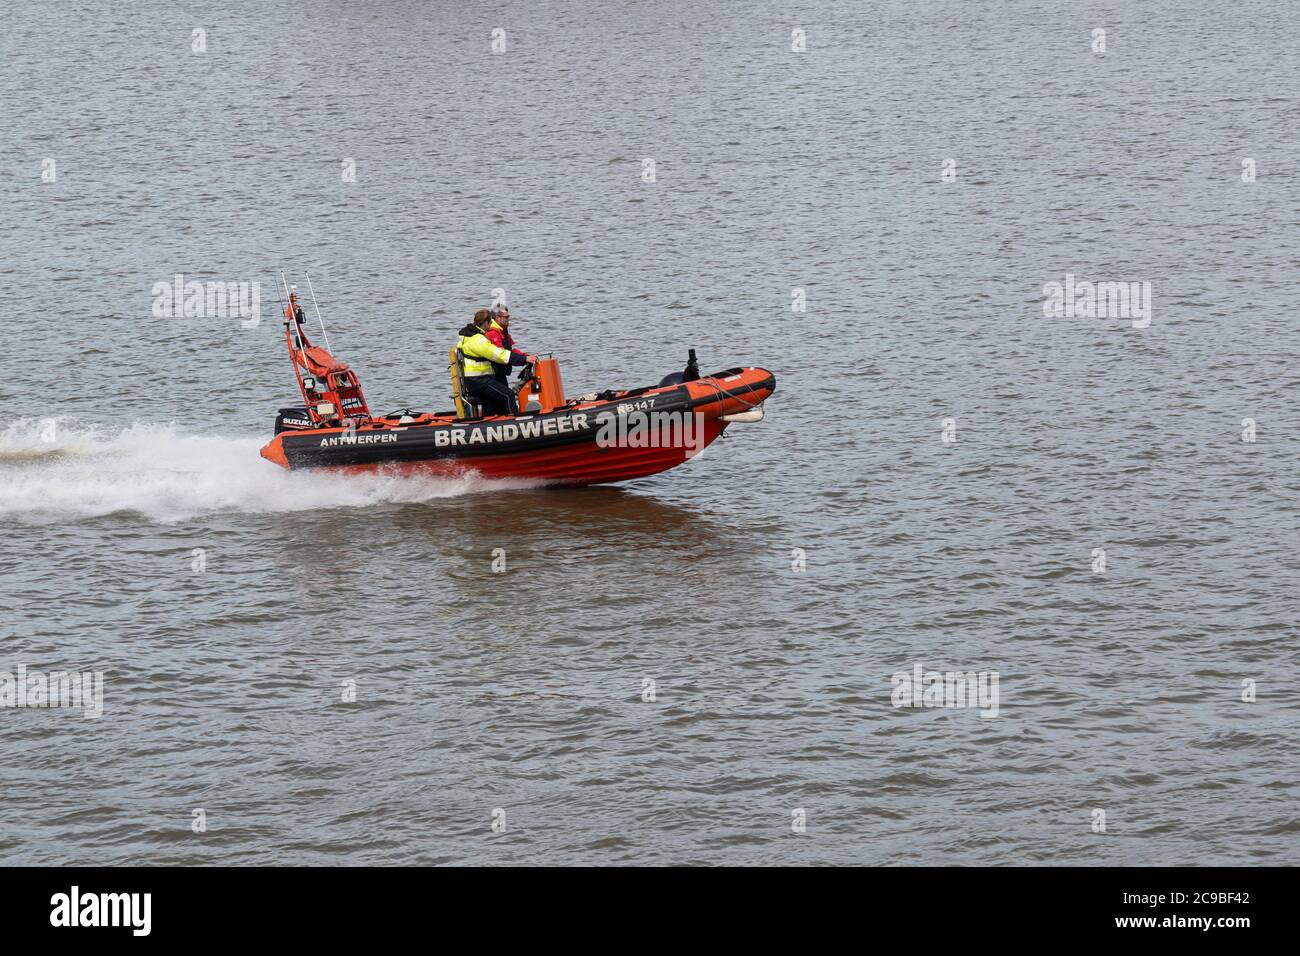 Antwerp, Belgium, July 19, 2020, Rescue boat of the fire brigade with two people on board Stock Photo